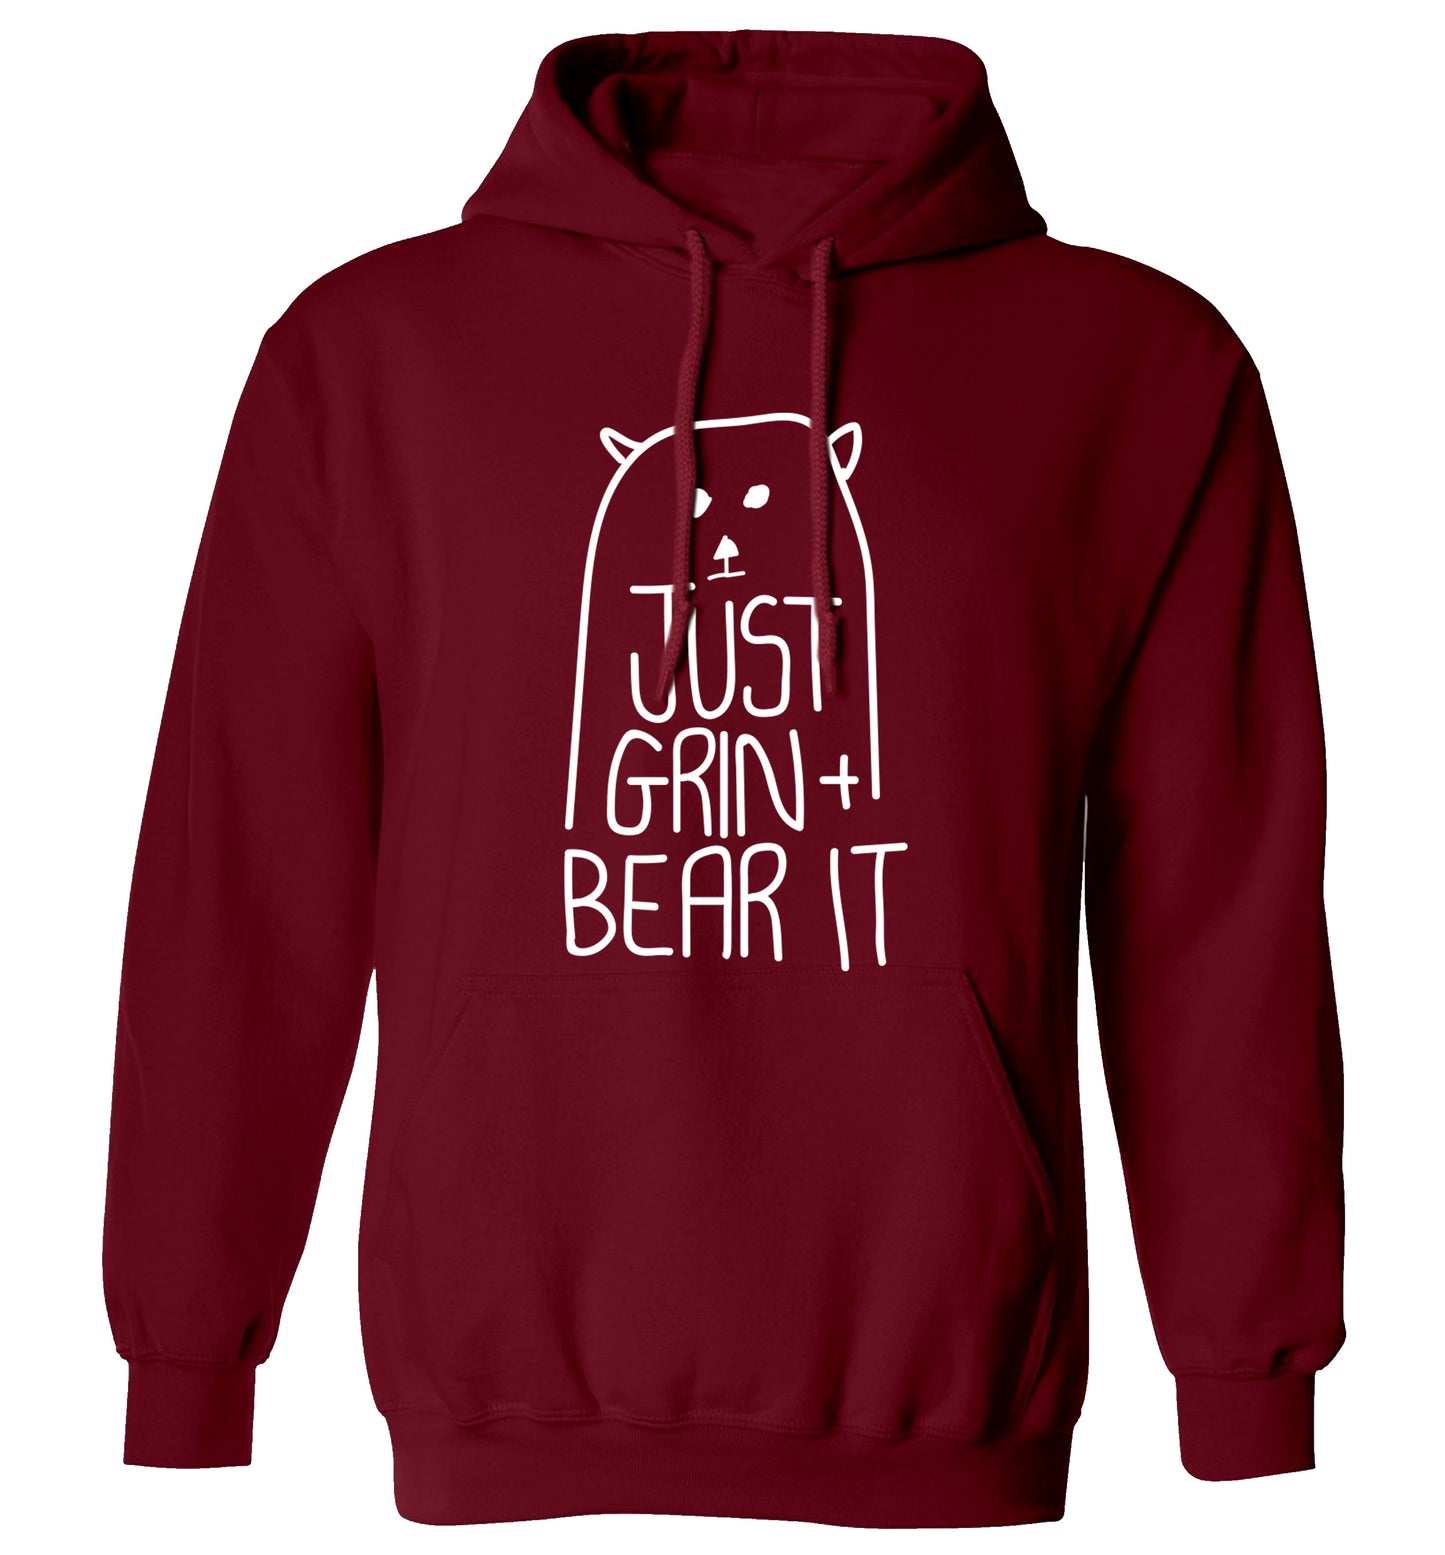 Just grin and bear it adults unisex maroon hoodie 2XL